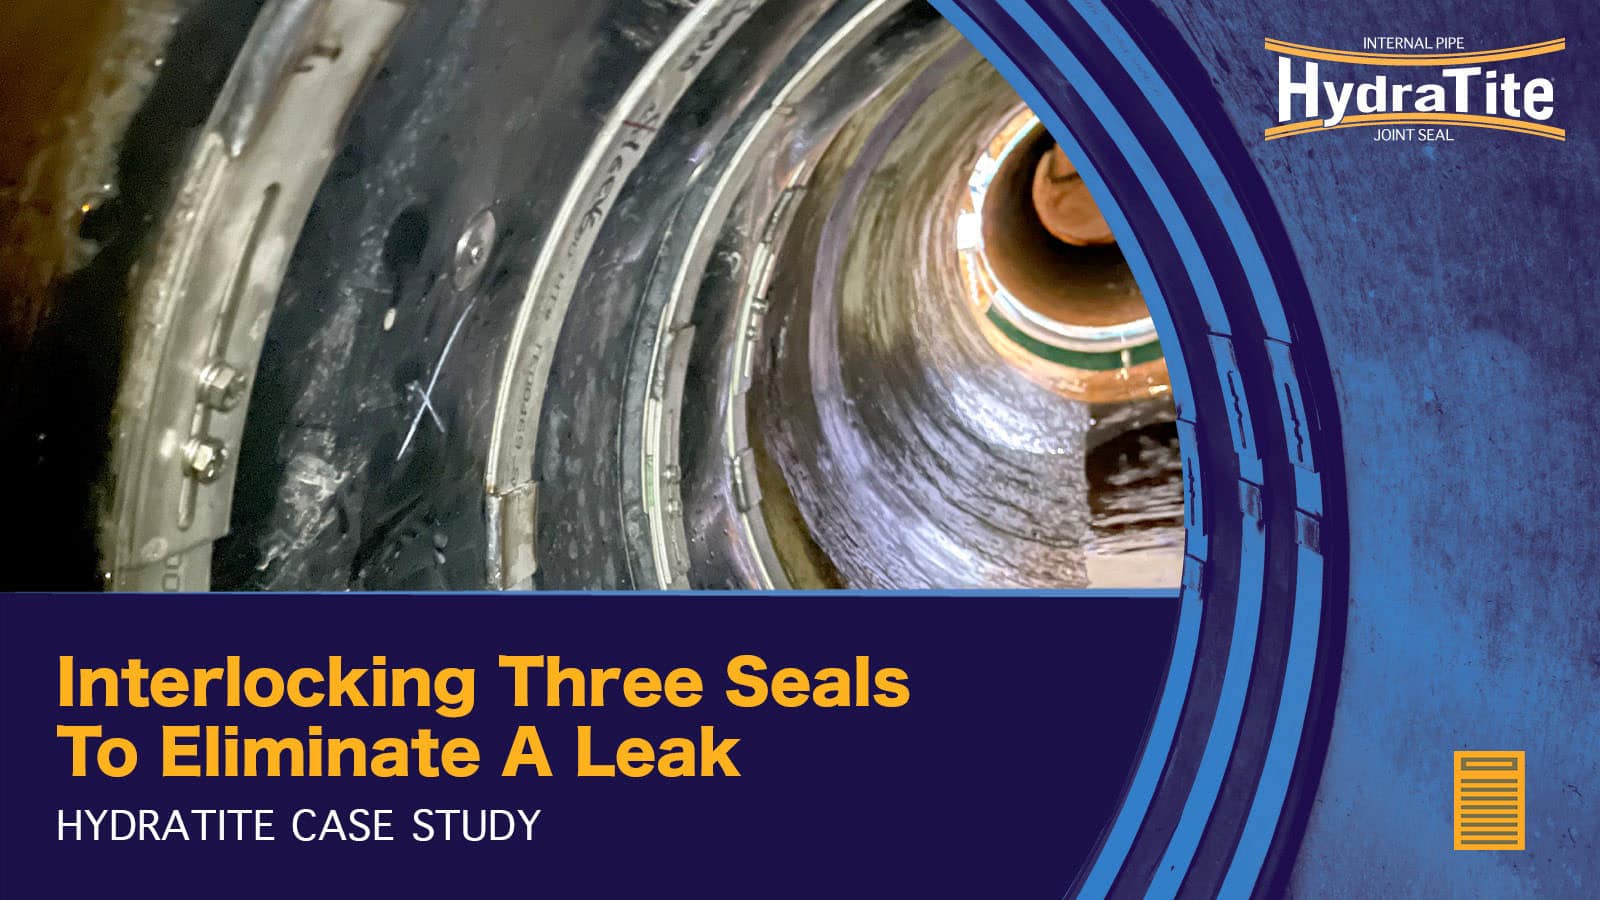 Case Study Teaser Image of Three interlocking seals covering a crack in an RCP, 'Interlocking Three Seals To Eliminate A Leak, HydraTite Case Study'